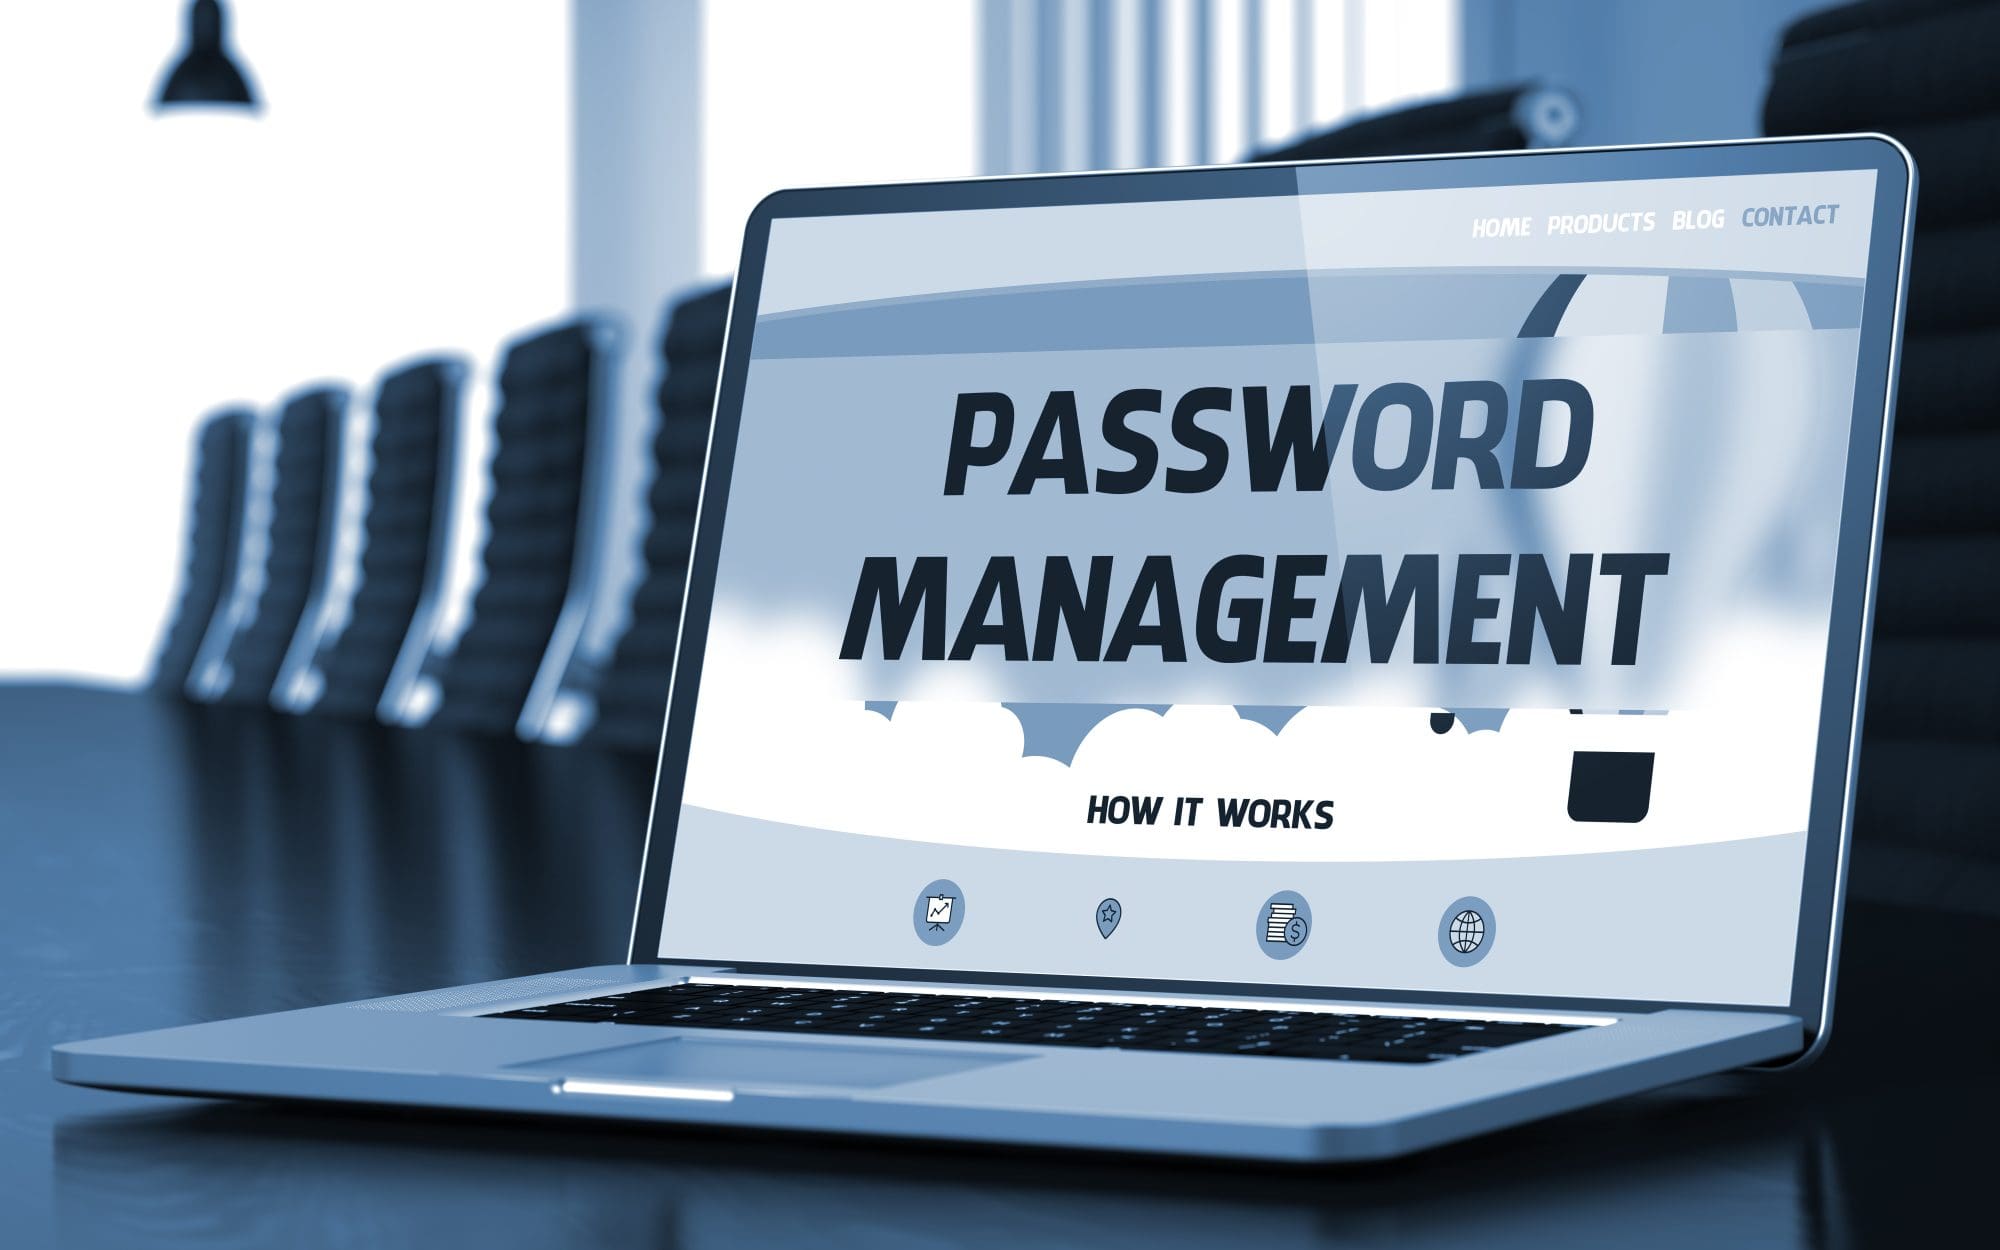 Laptop with Password Management on the screen